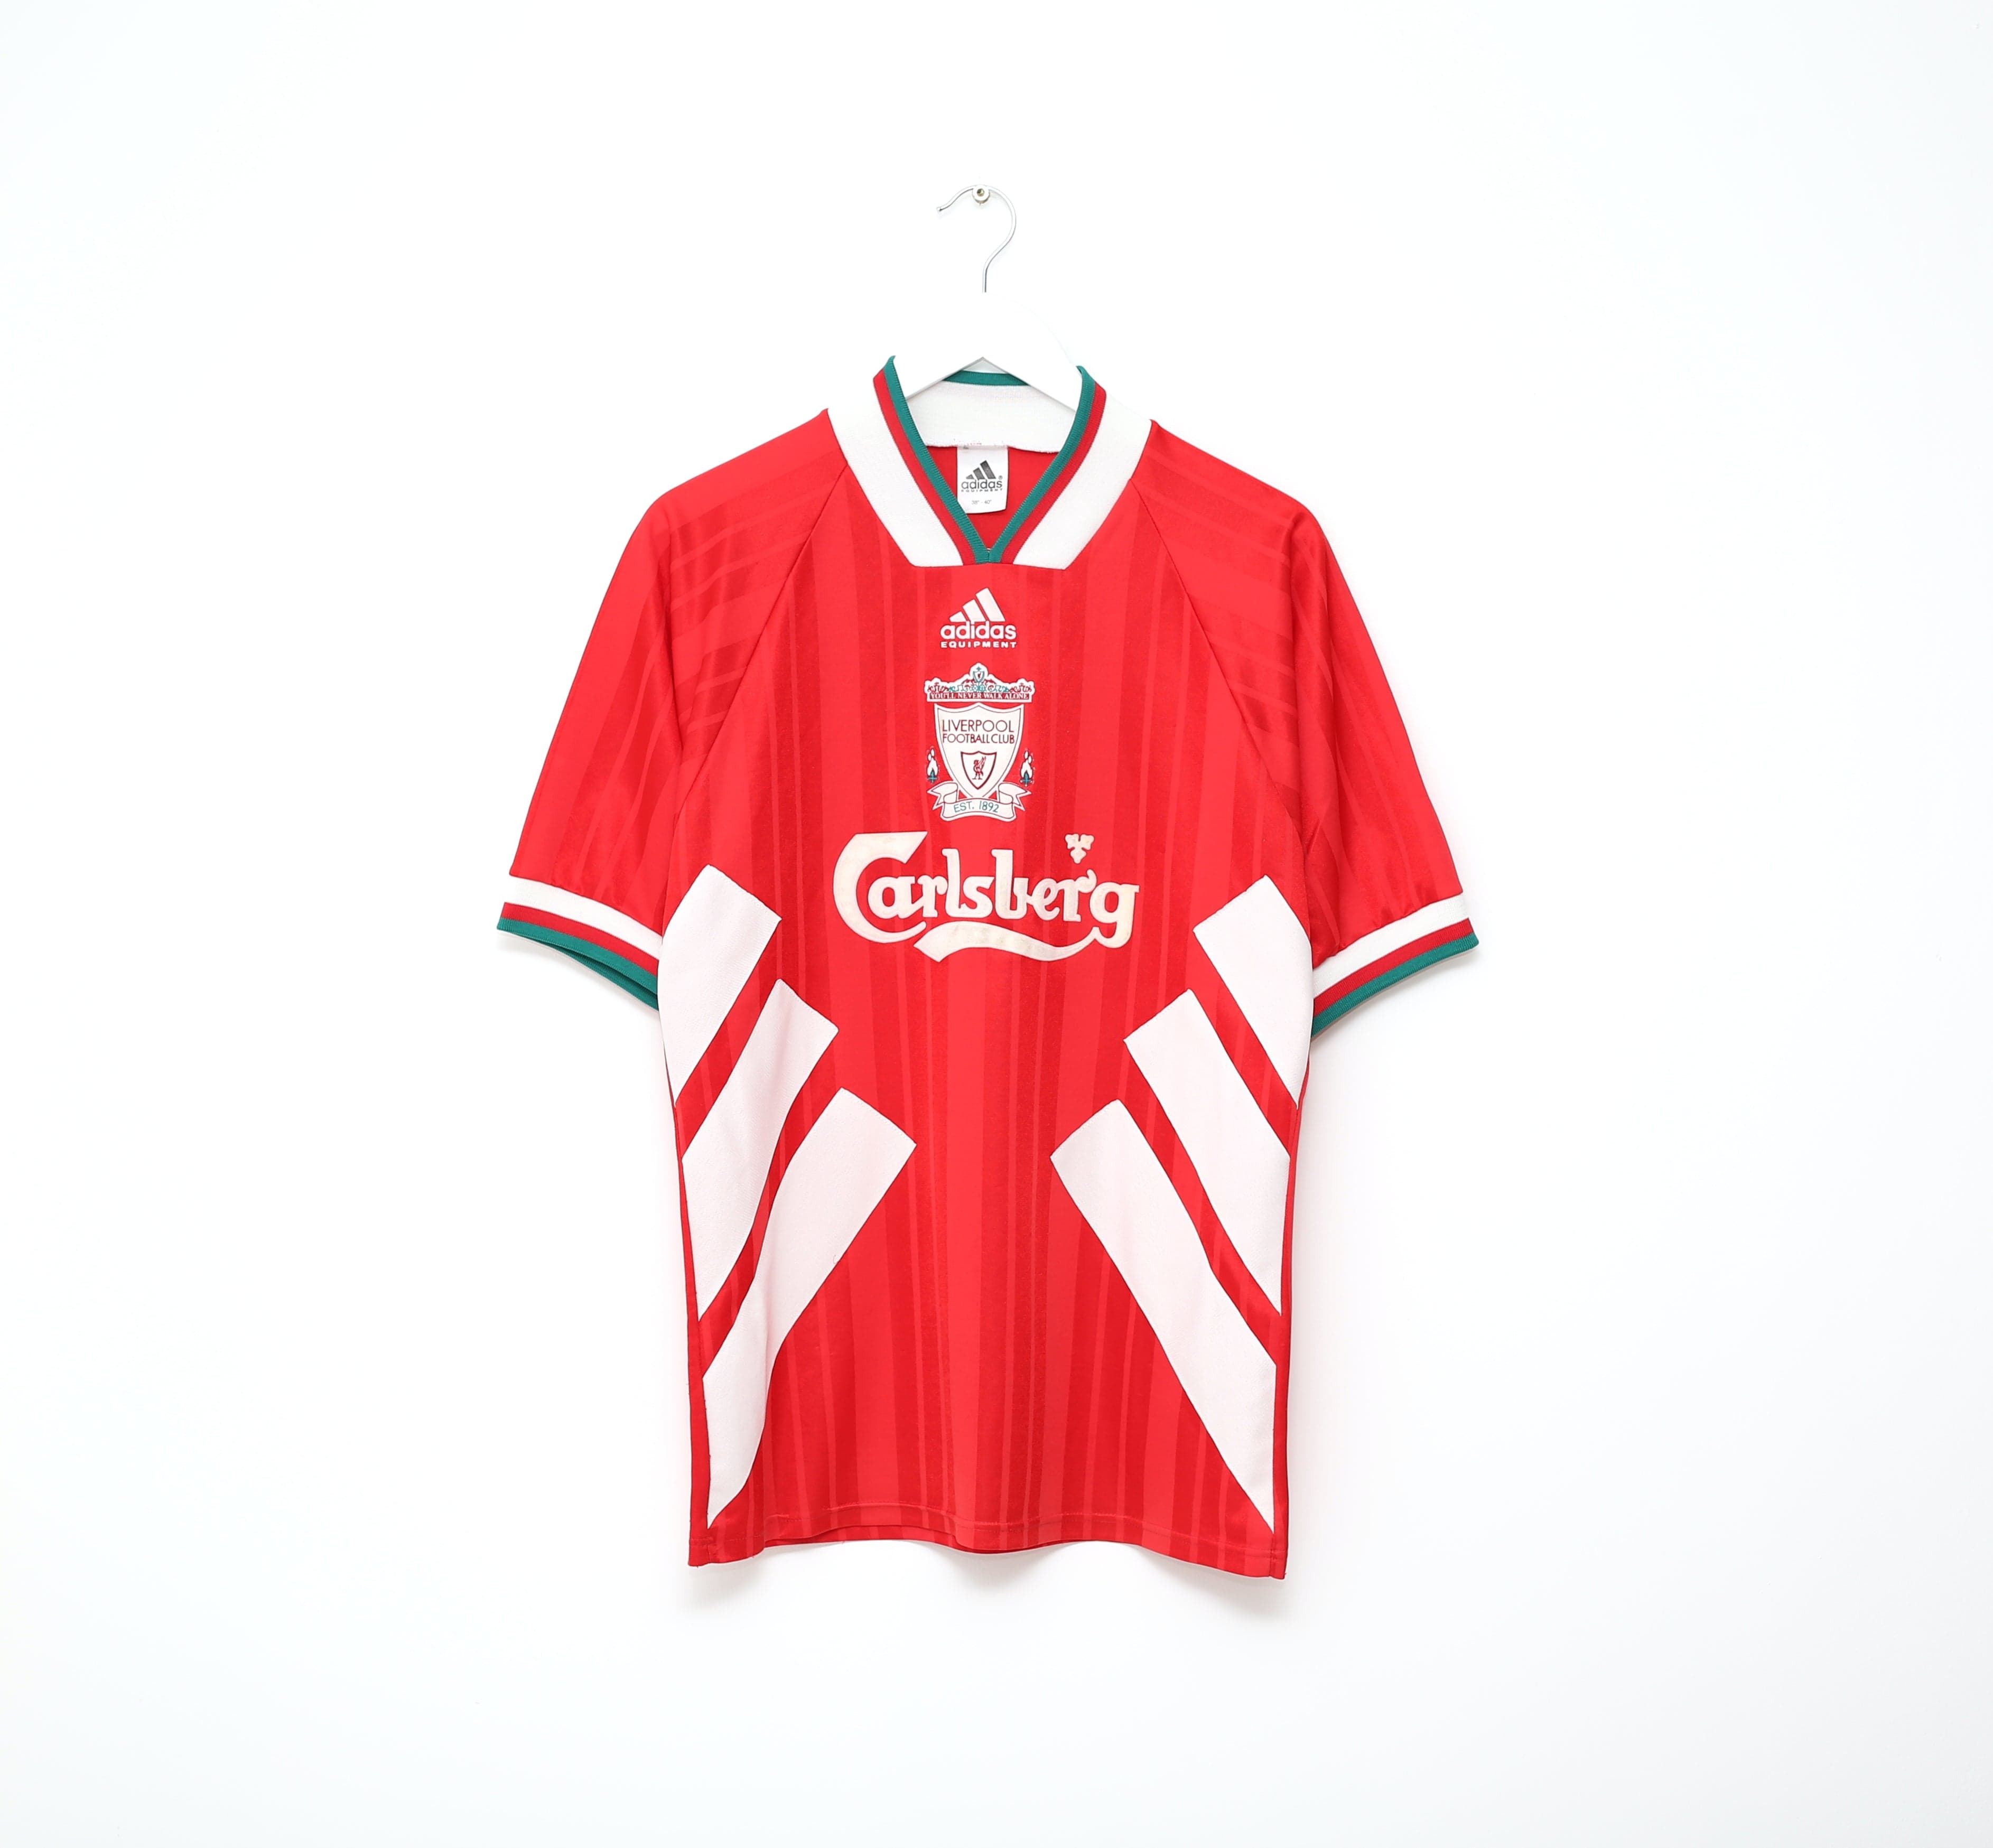 1993/94 Liverpool Home Football Shirt / Old Vintage Soccer Jersey